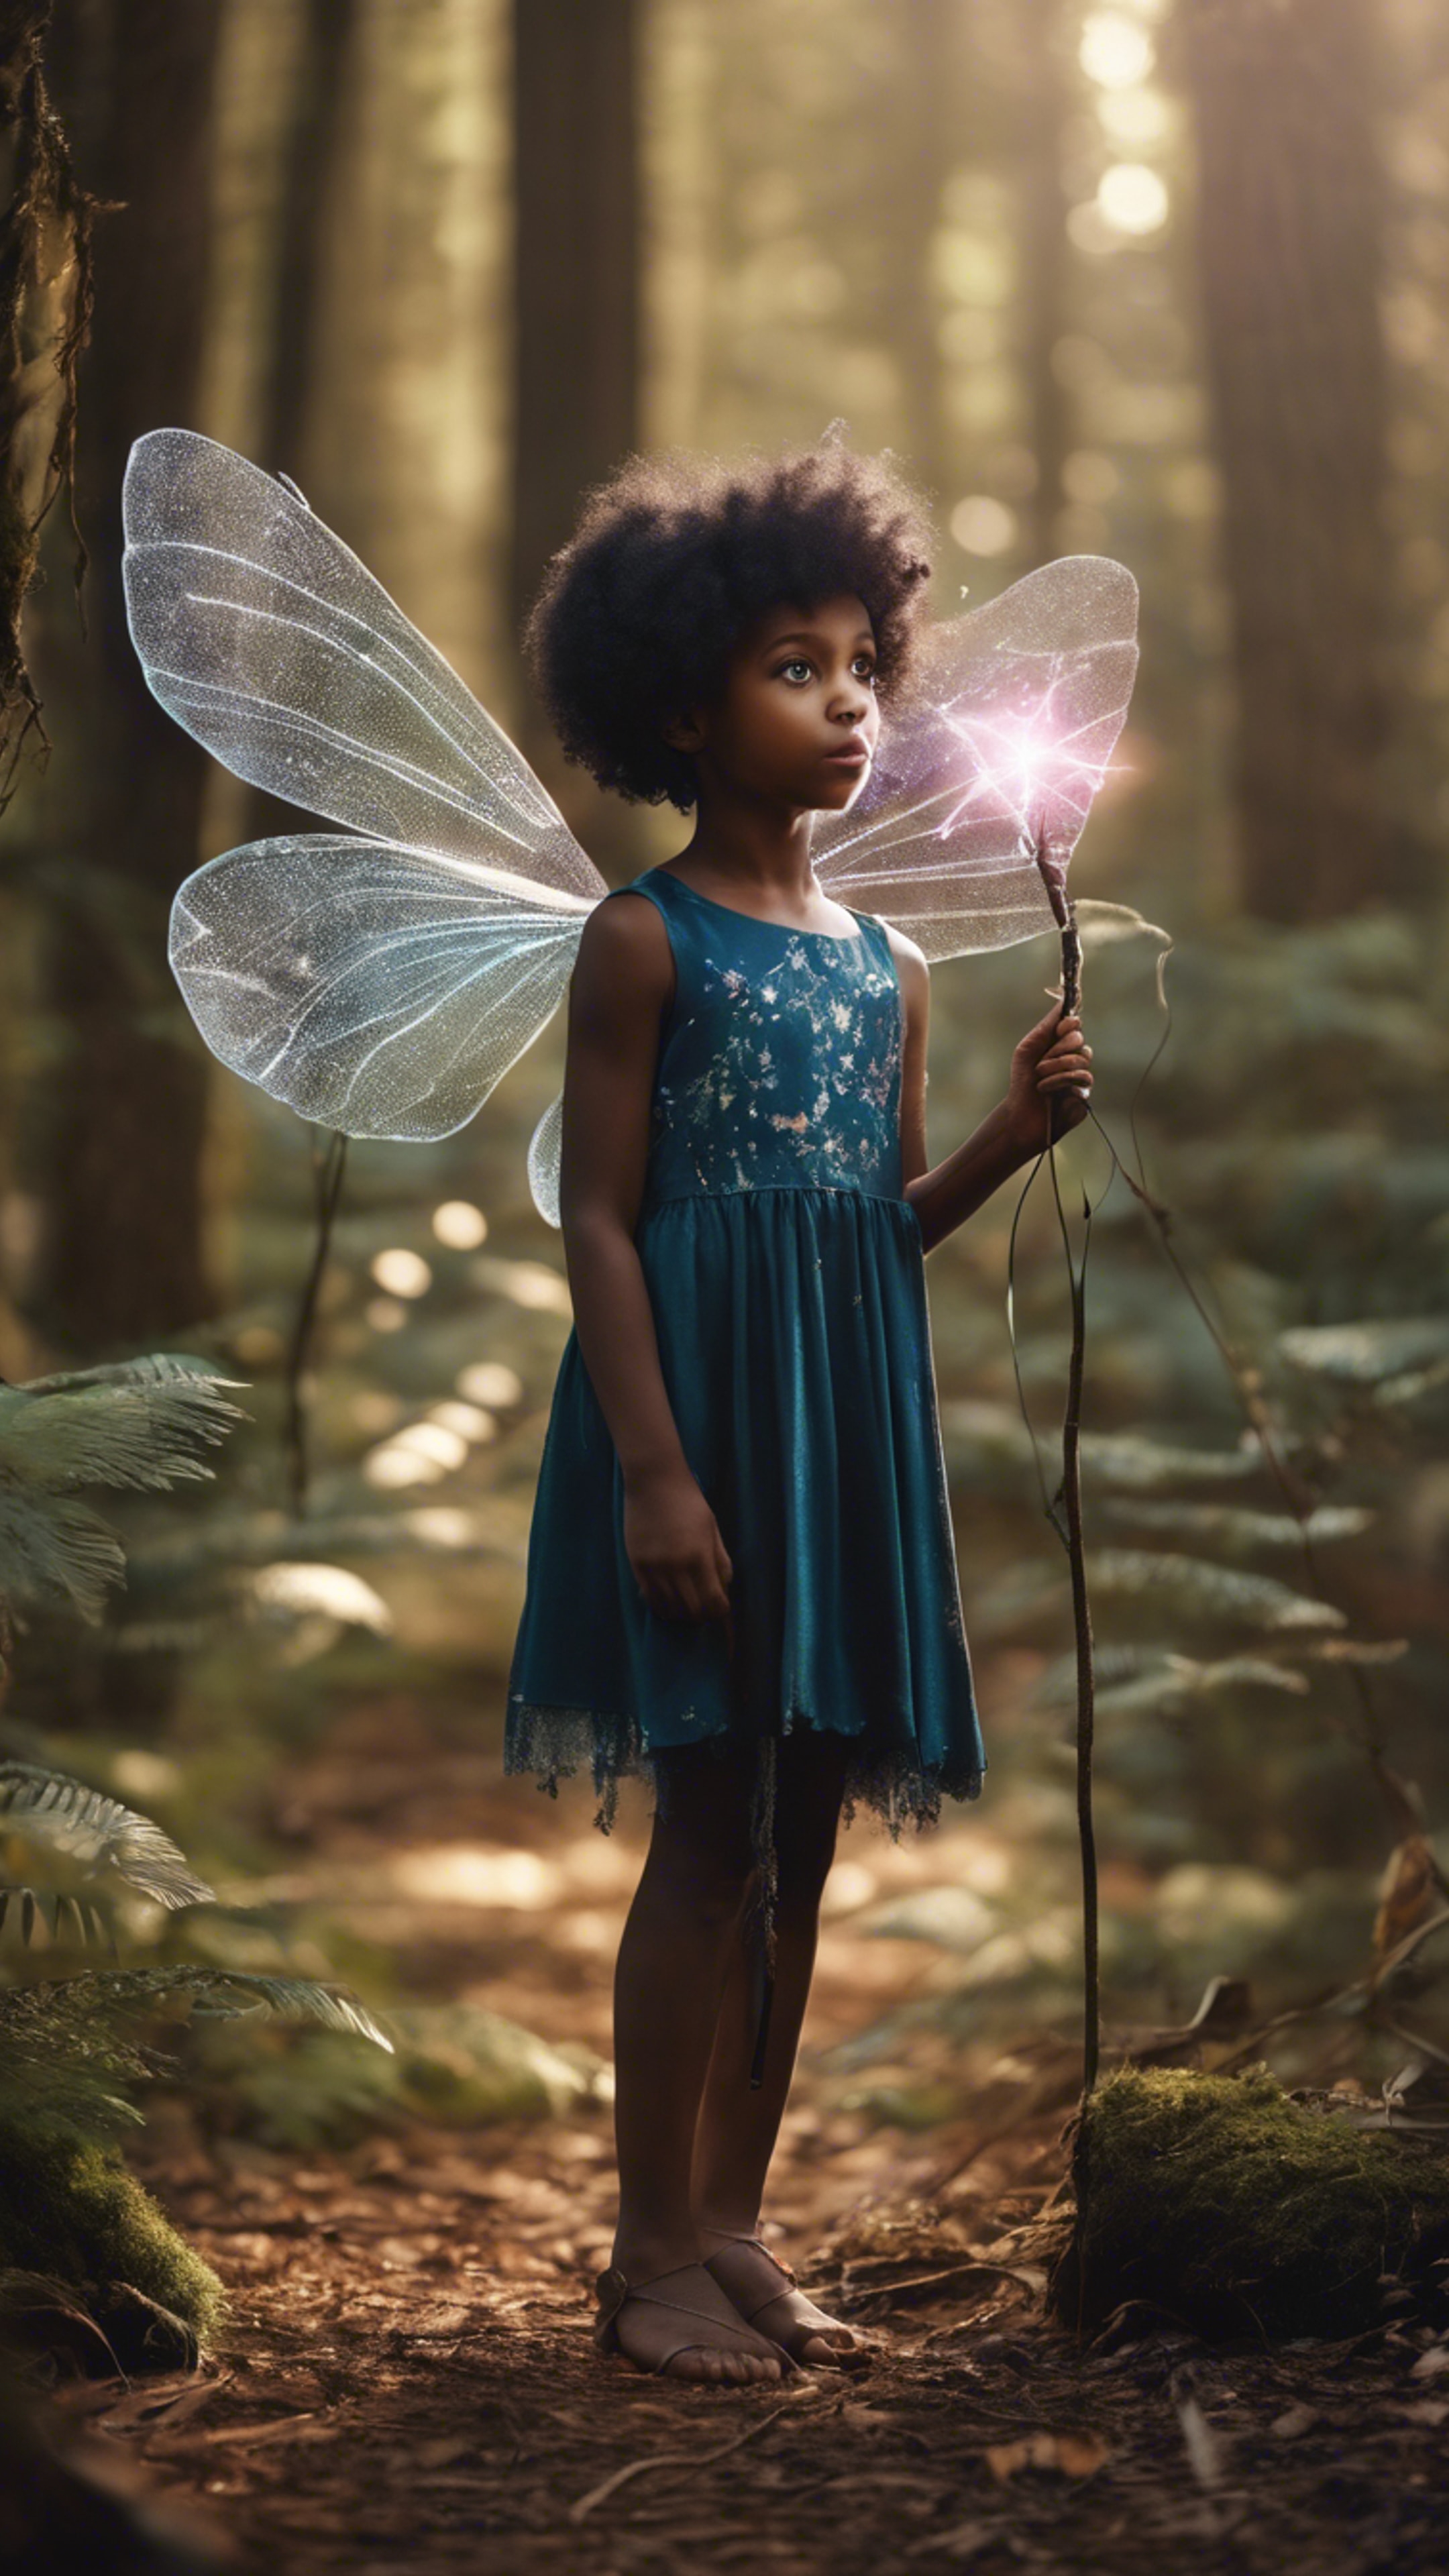 A cute image of a black girl wearing fairy wings, holding a magic wand in a mystical forest. Tapet[6c77347a4892474c928d]